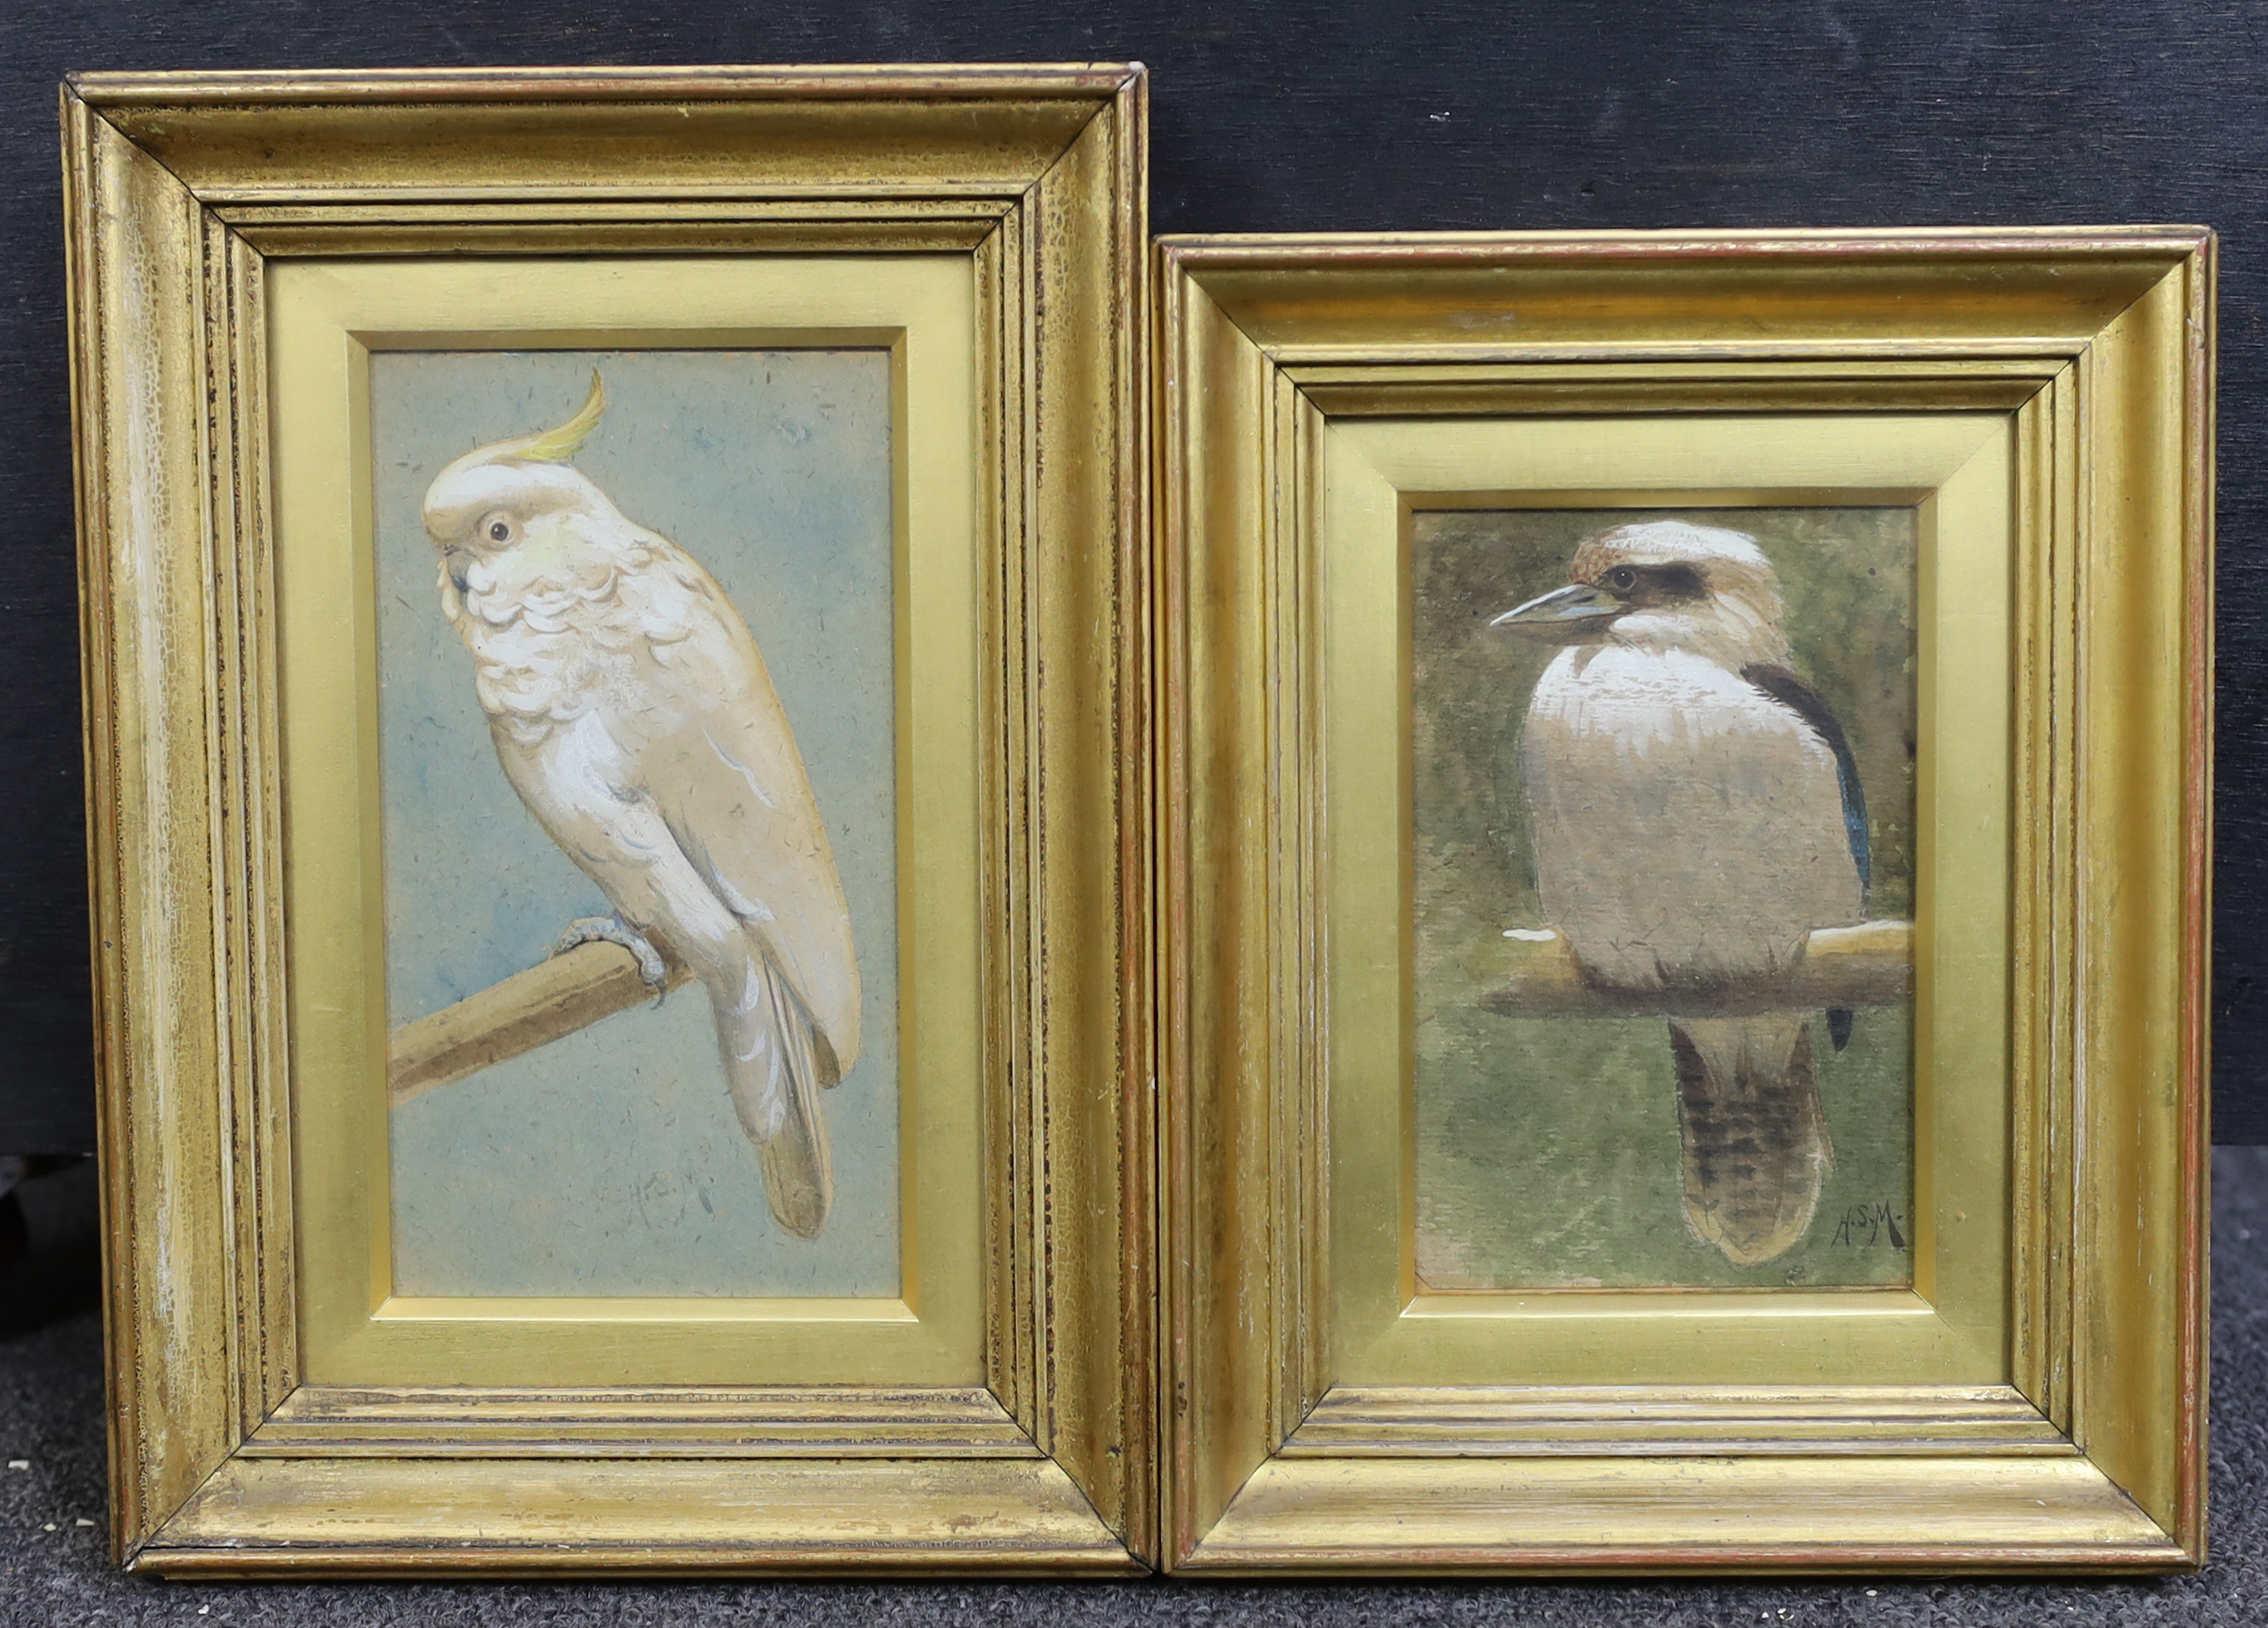 Henry Stacy Marks R.A., (British, 1829-1898), Kookaburra & Scarlet Crested Cockatoo, watercolour and gouache (2), 14 x 9cm & 17 x 9cm